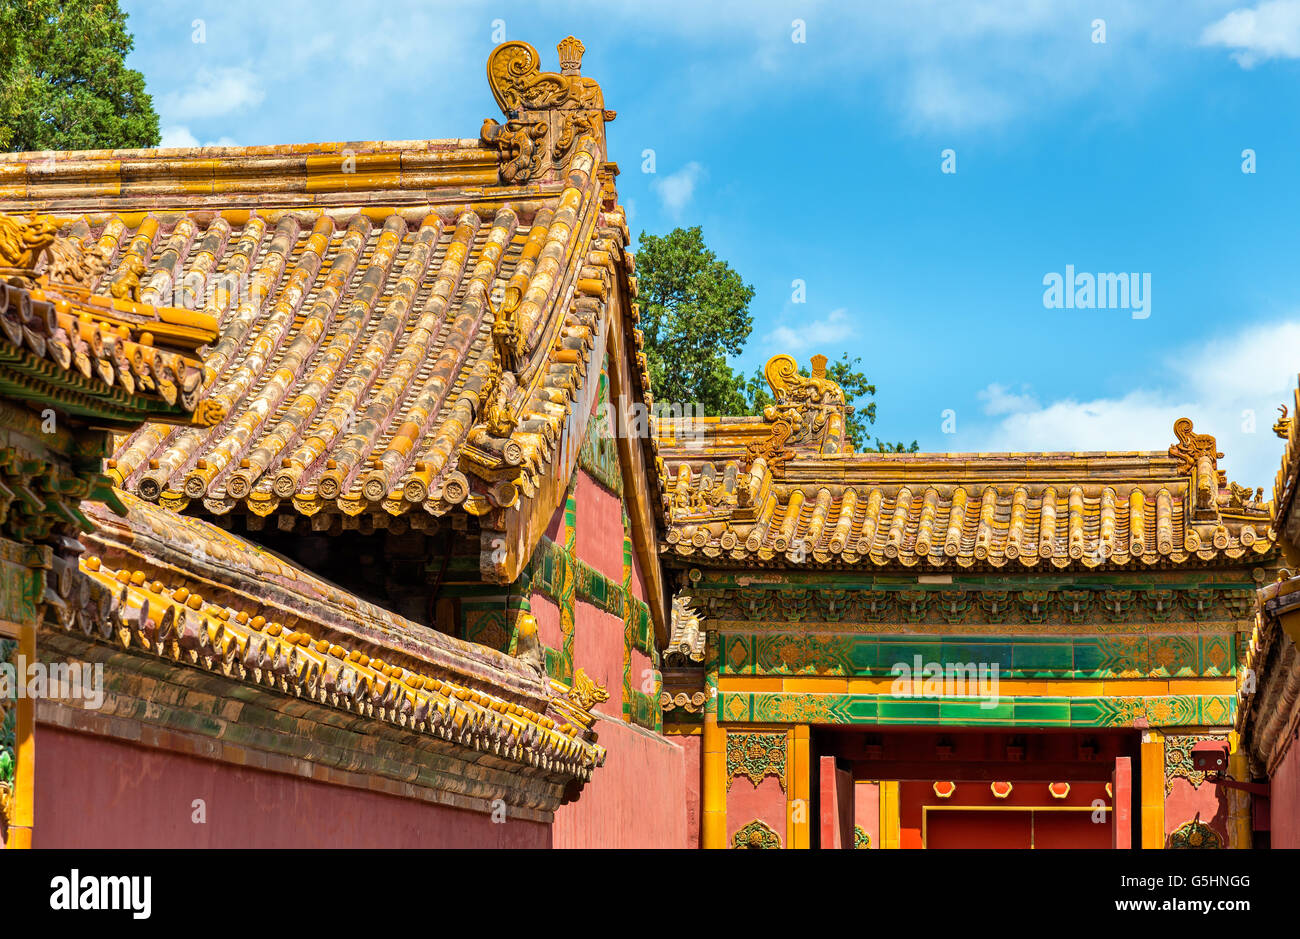 Roof decorations in the Forbidden City, Beijing Stock Photo